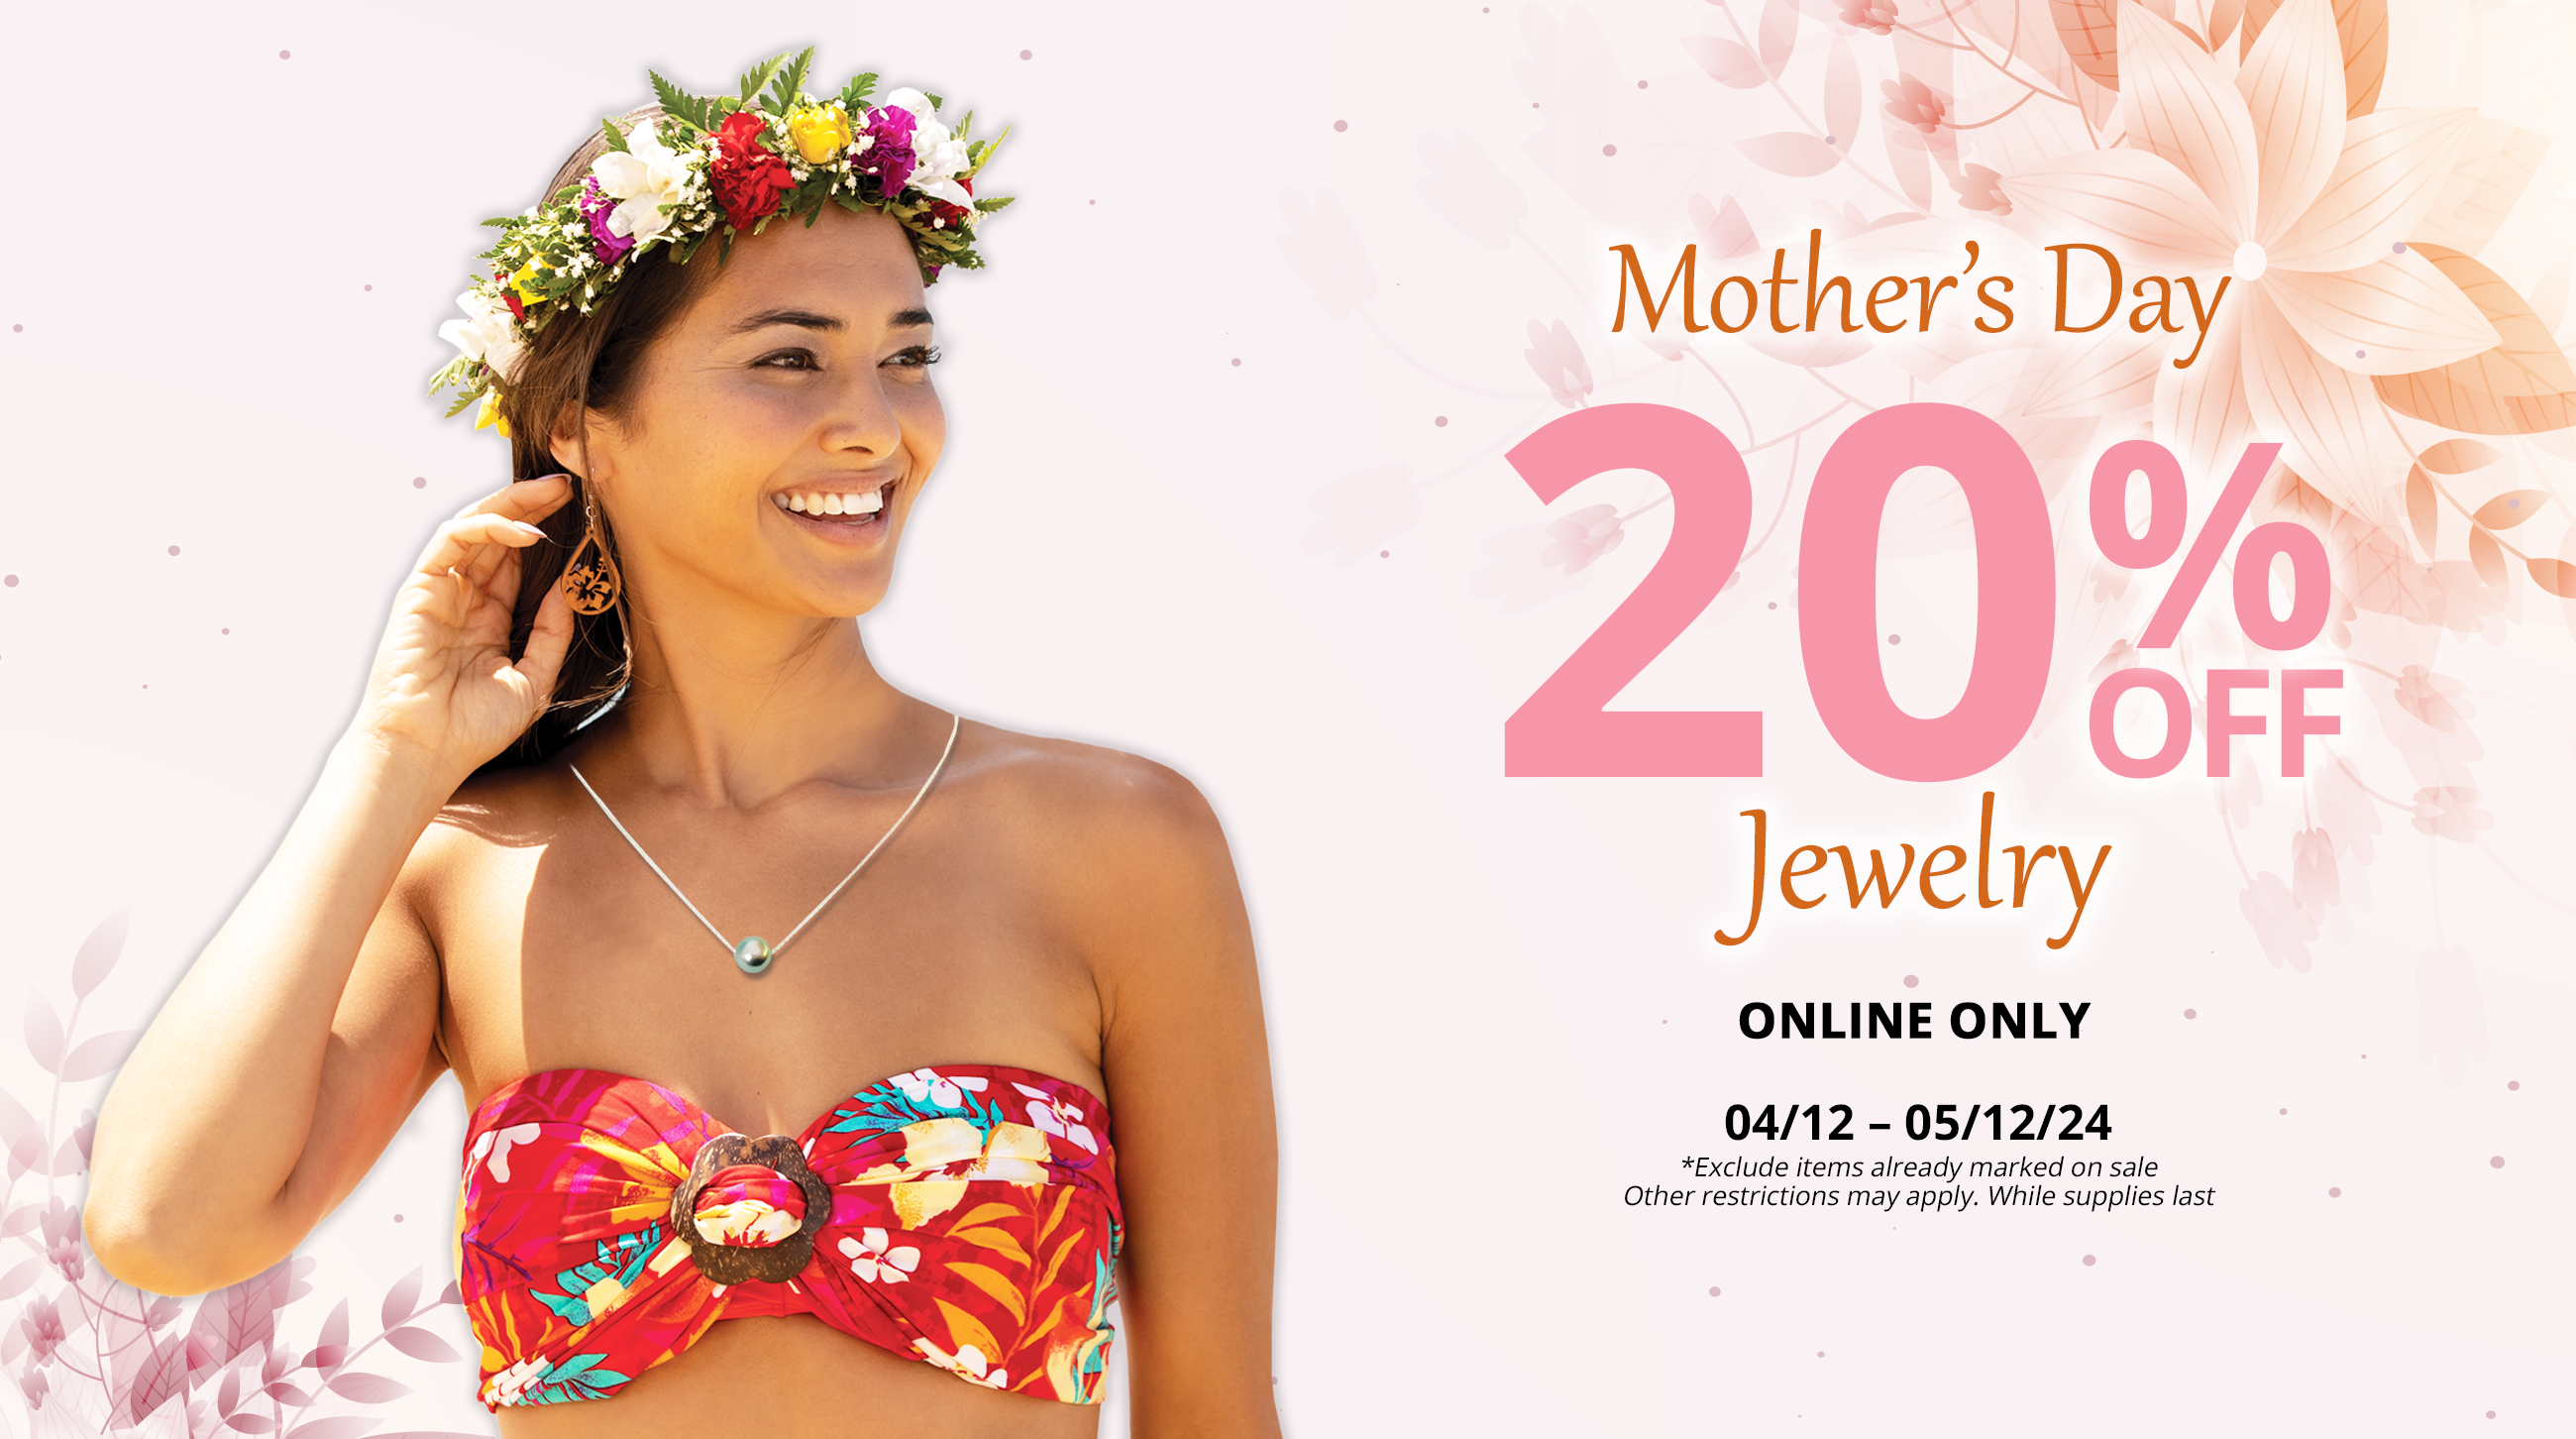 Mother's Day Jewelry Promo